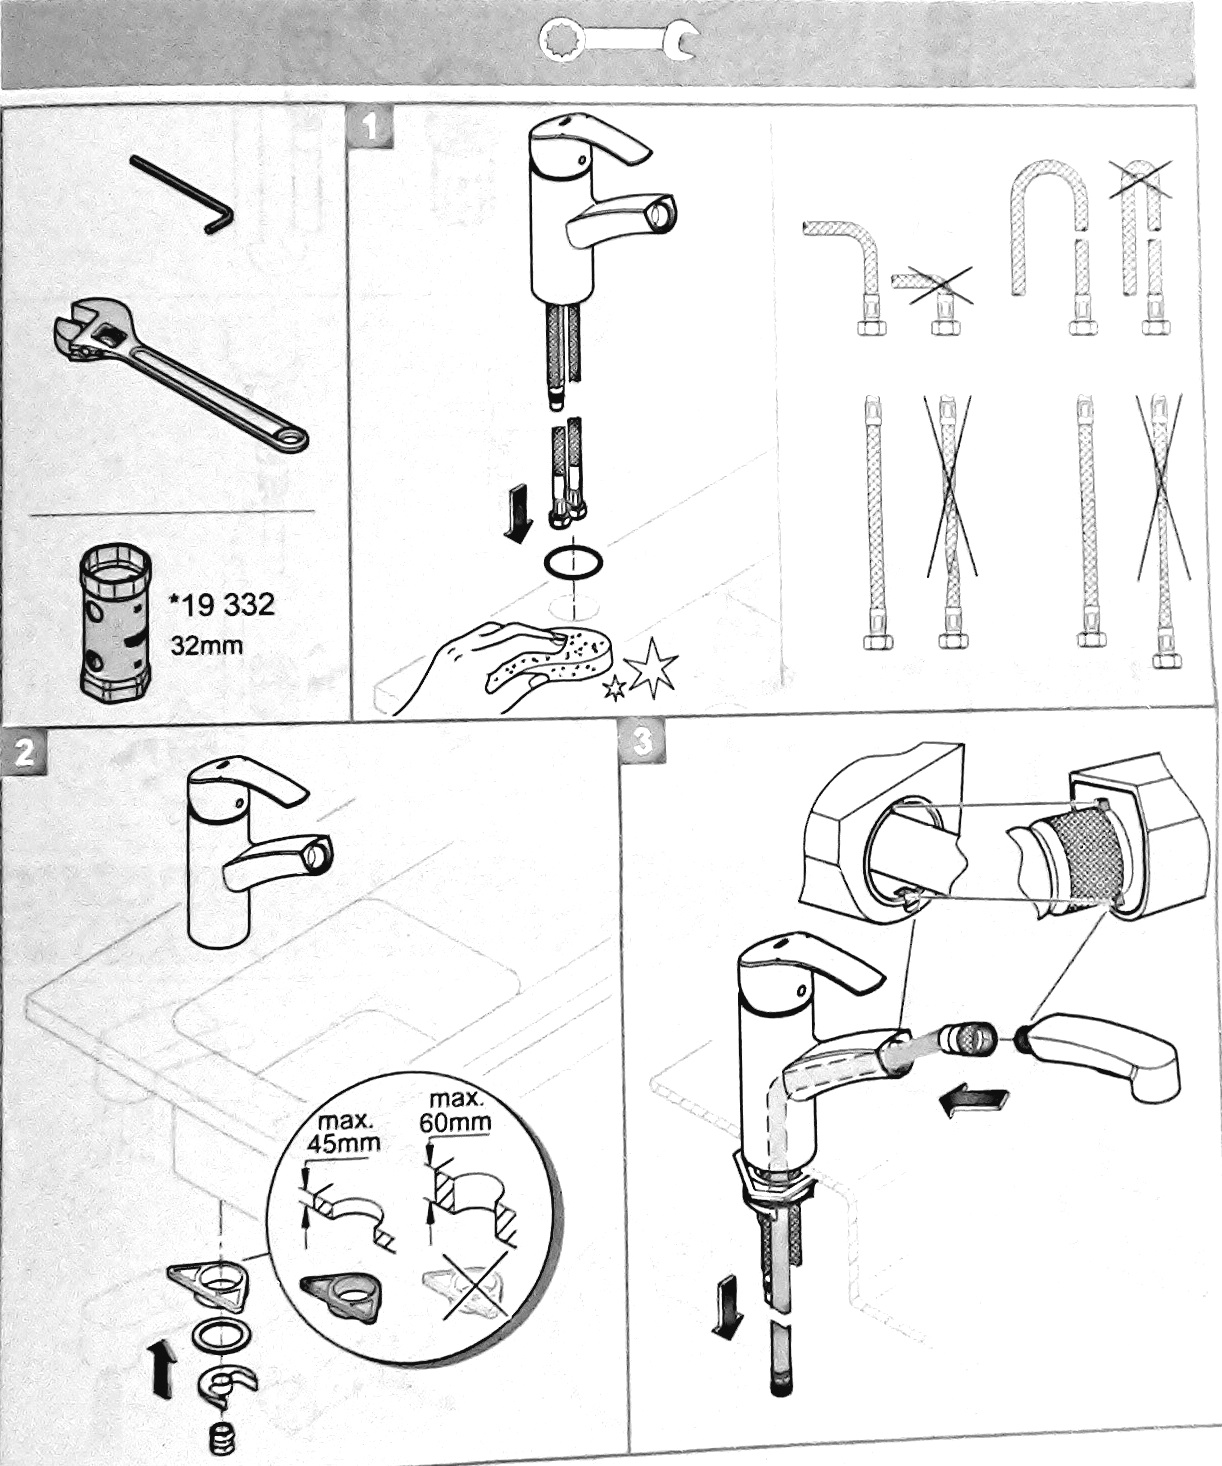  grohe-1 